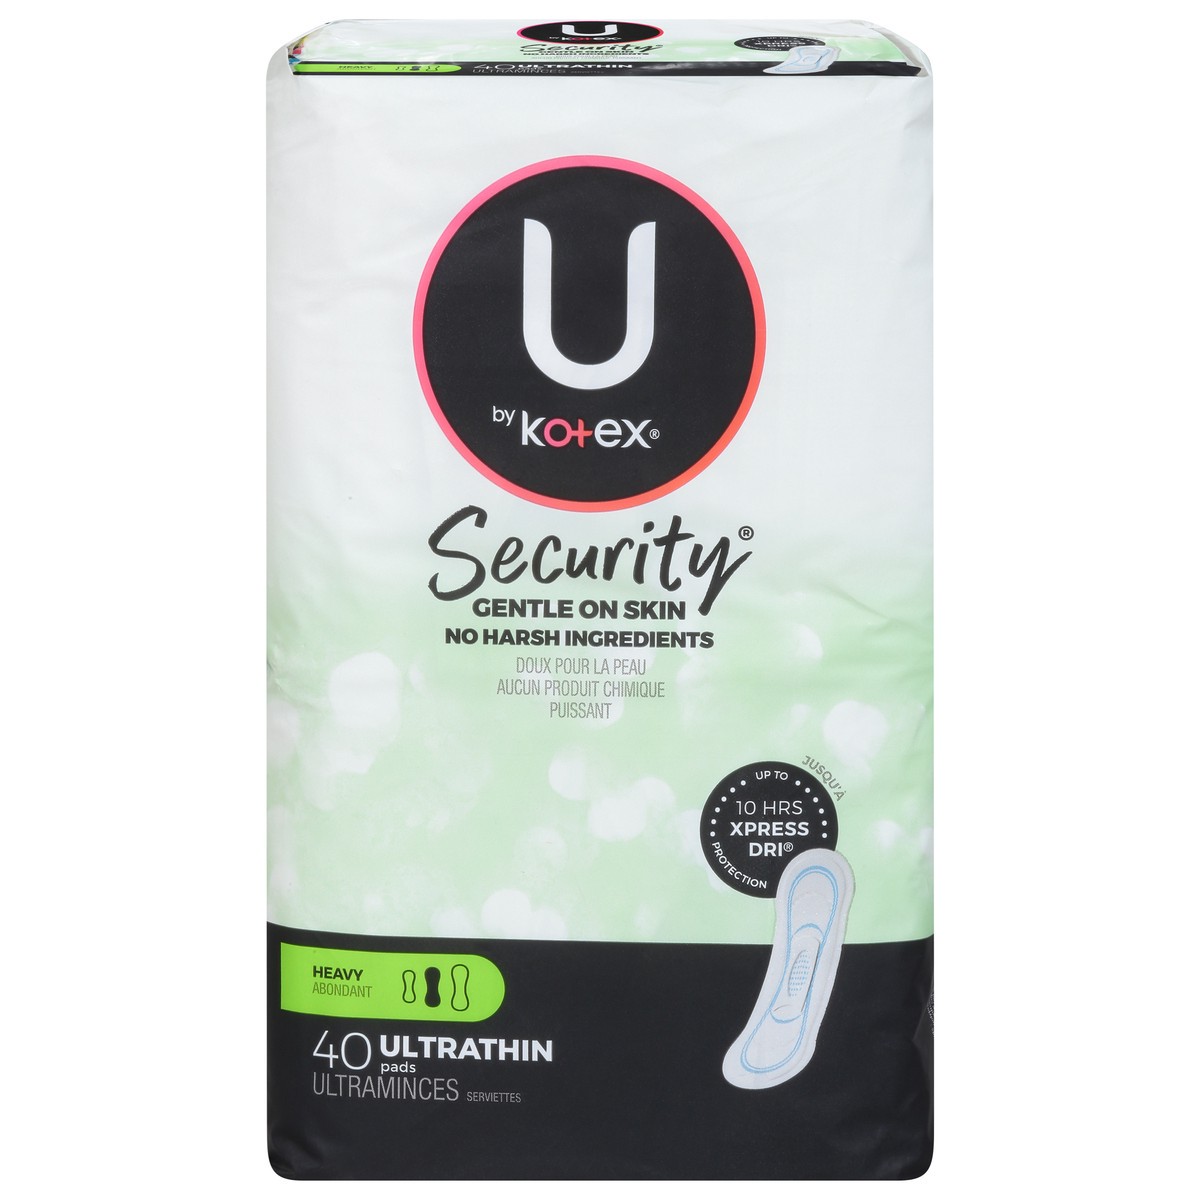 slide 6 of 16, U by Kotex Security Heavy Ultra Thin Pads 40 ea, 40 ct